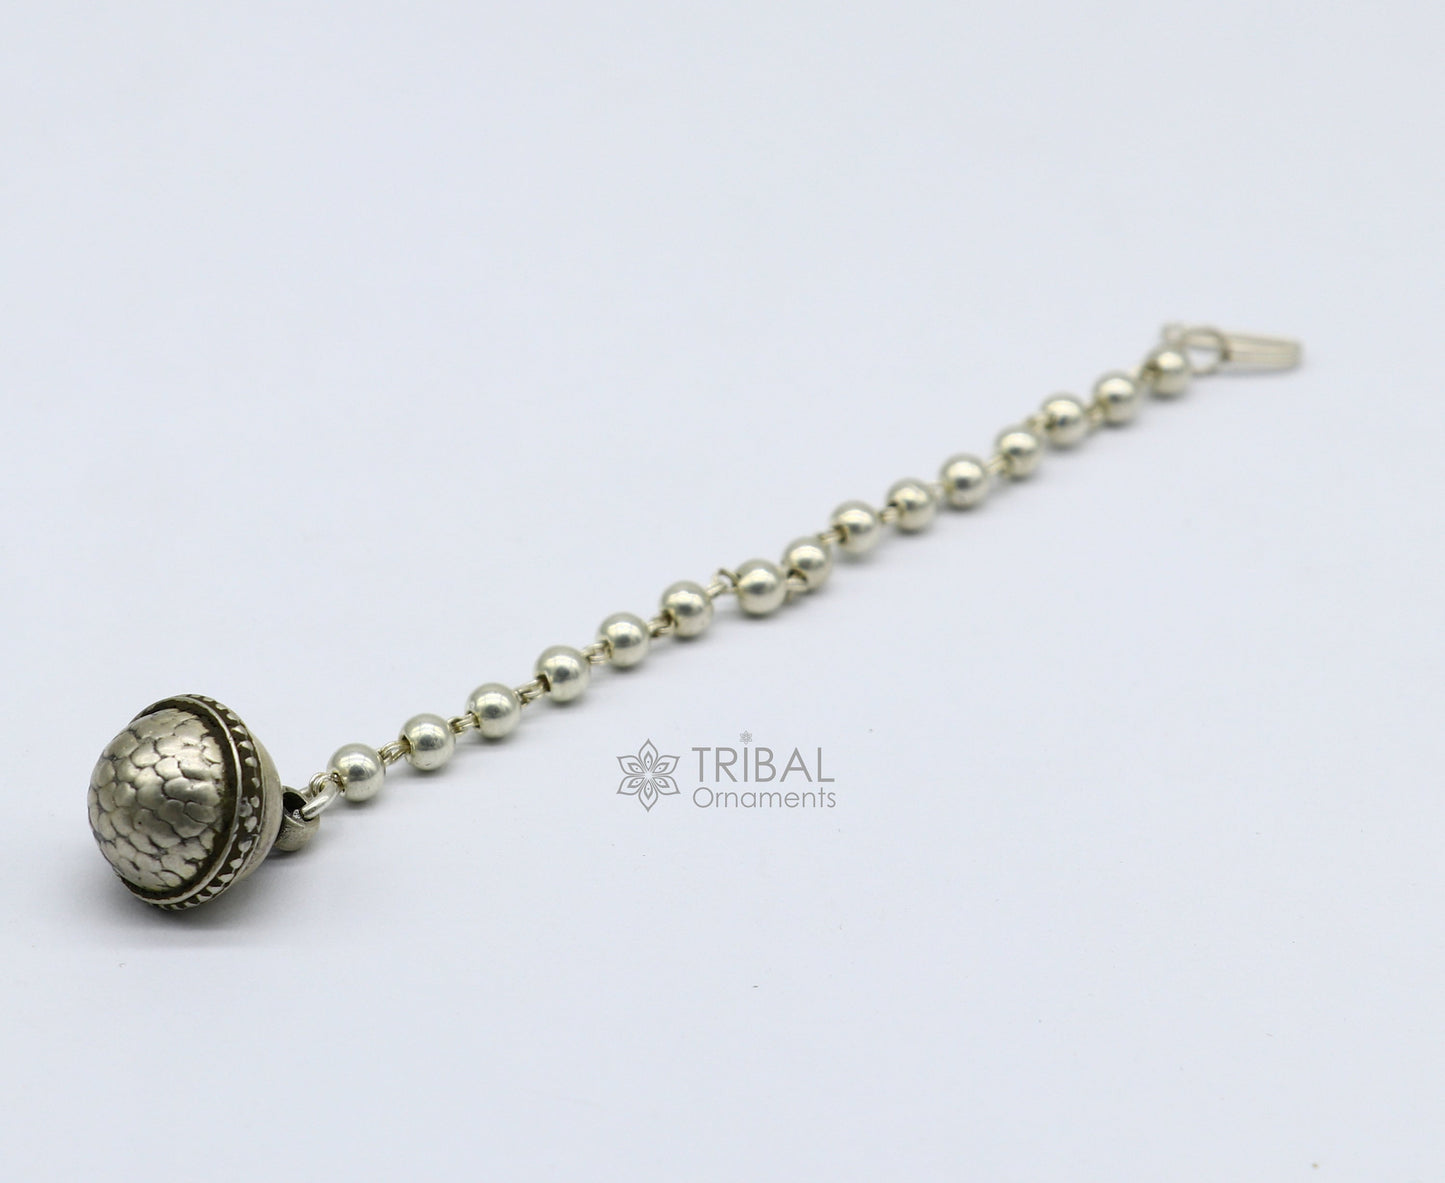 Indian traditional cultural vintage style mangtika amazing hair jewellery head jewelry 925 sterling silver tika ethnic tribal jewelry mt22 - TRIBAL ORNAMENTS